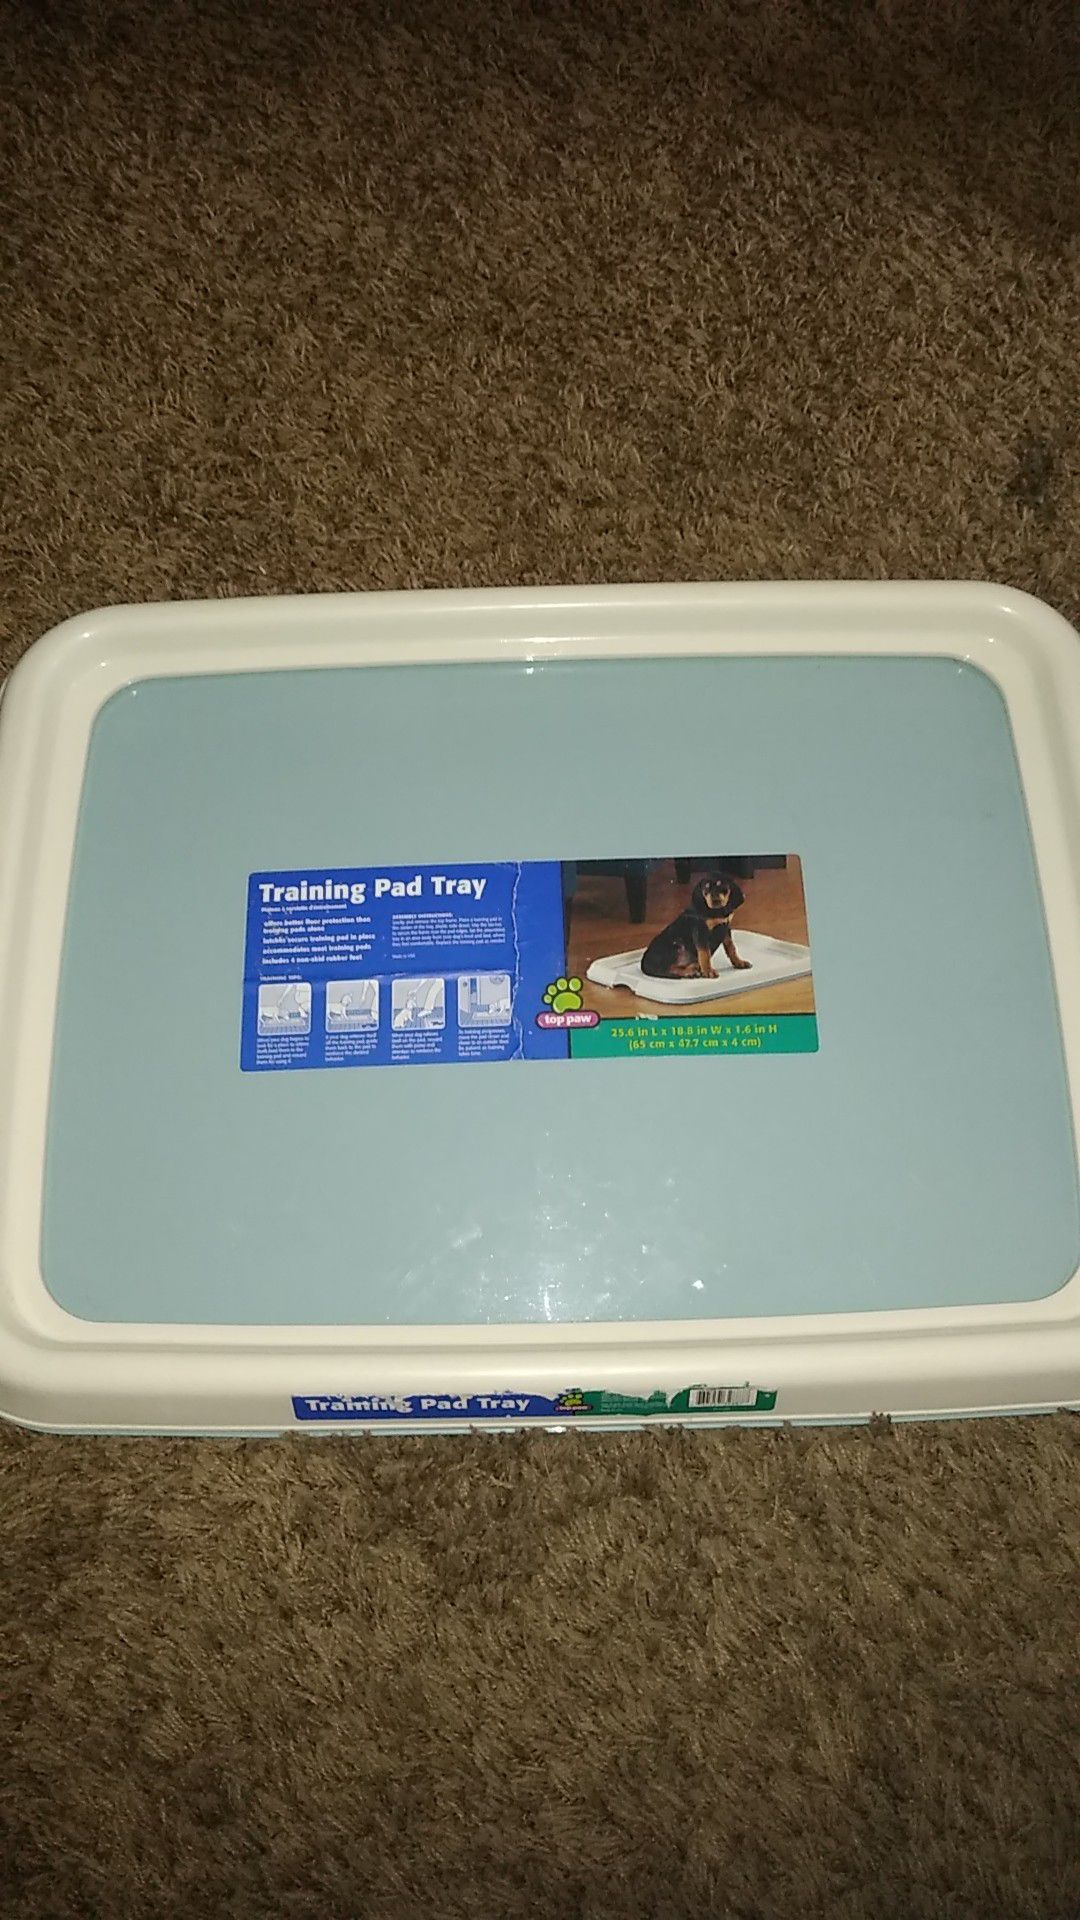 Training pad tray for puppies